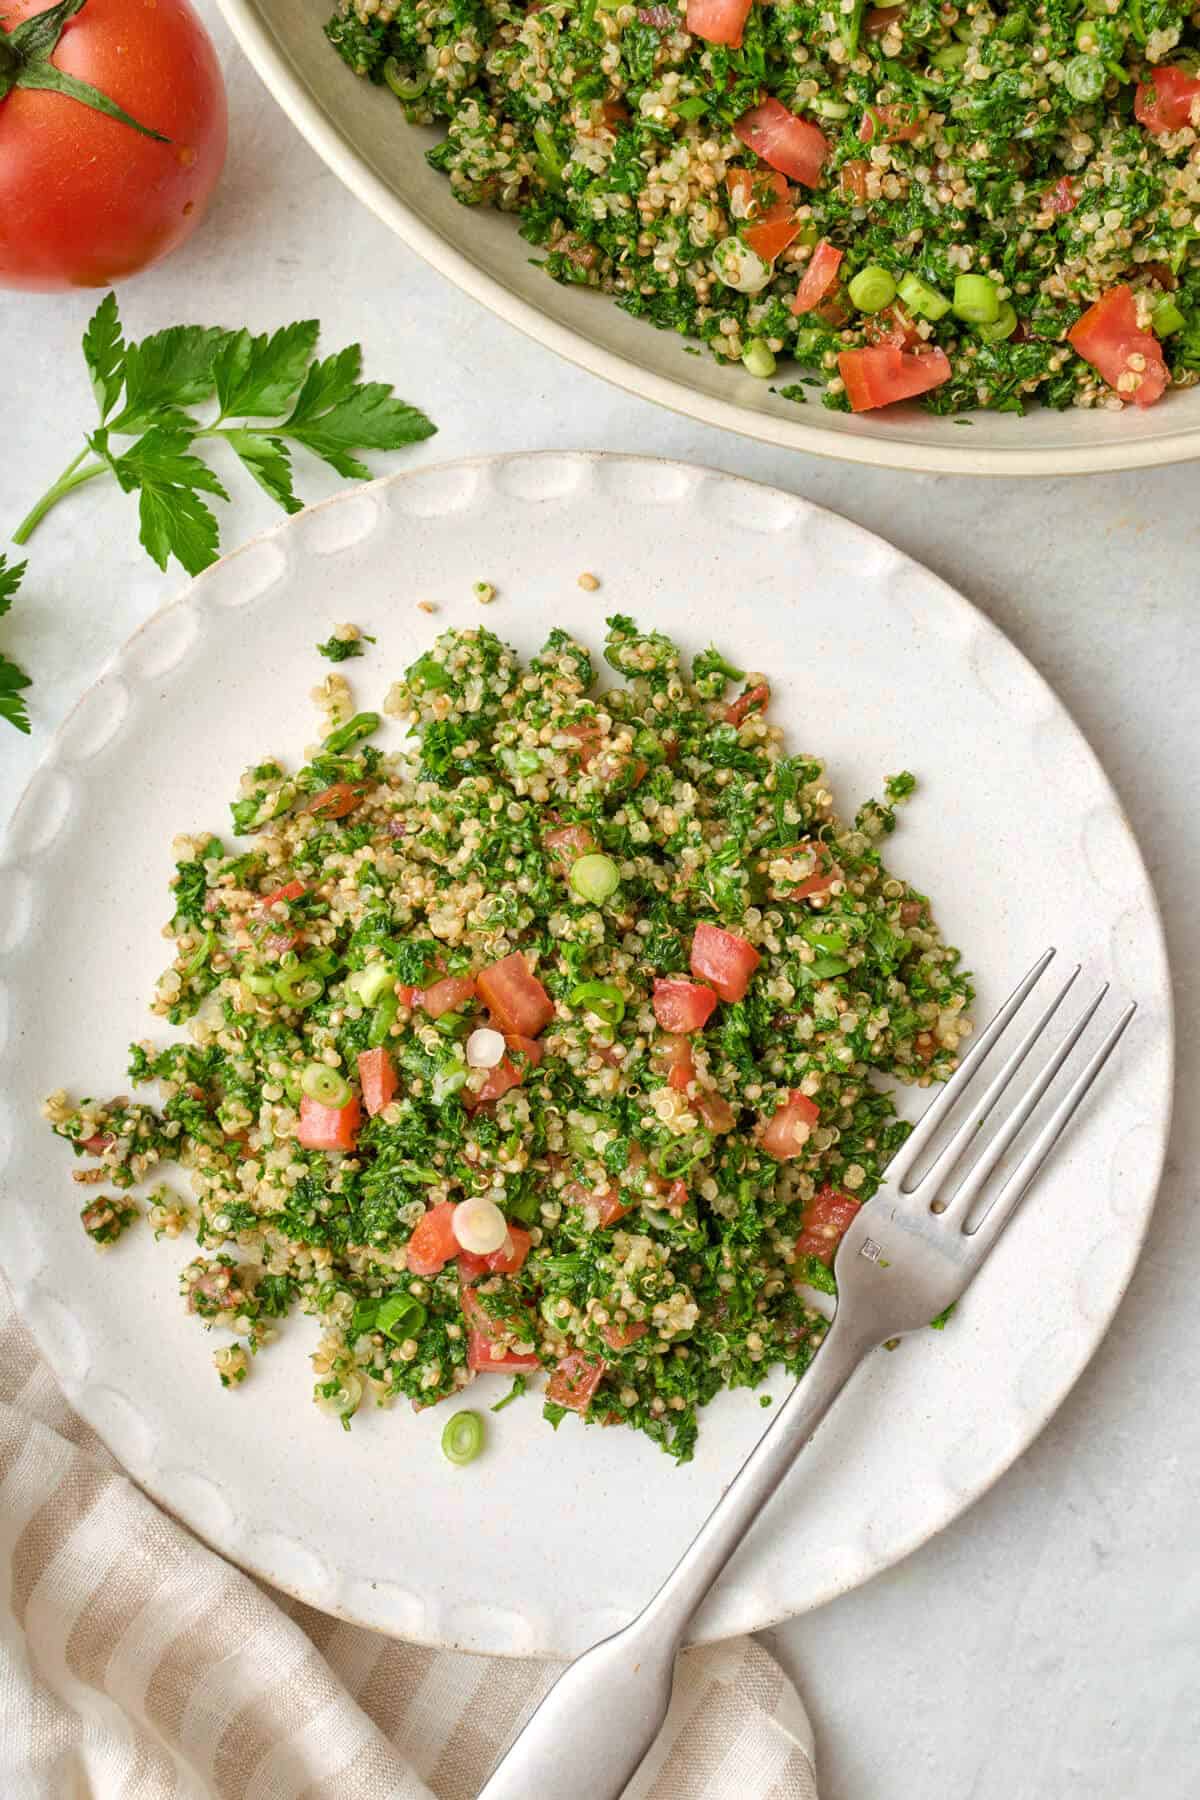 Plate of the of final quinoa tabbouleh recipe garnished with green onions